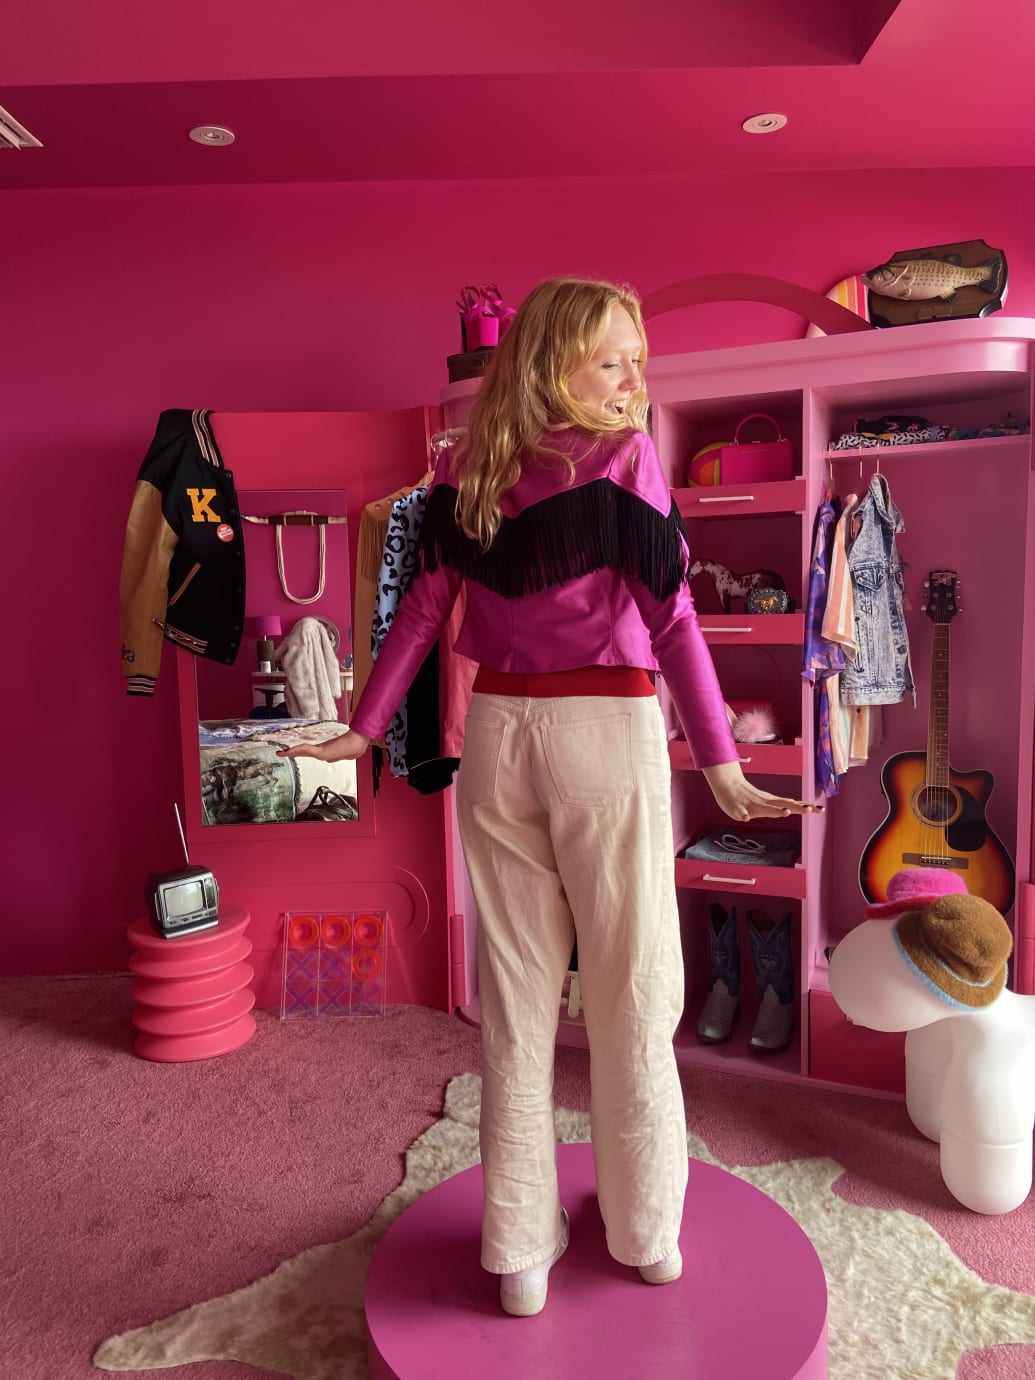 Fletcher trying on a pink Western jacket in a pink bedroom, in front of a wardrobe.